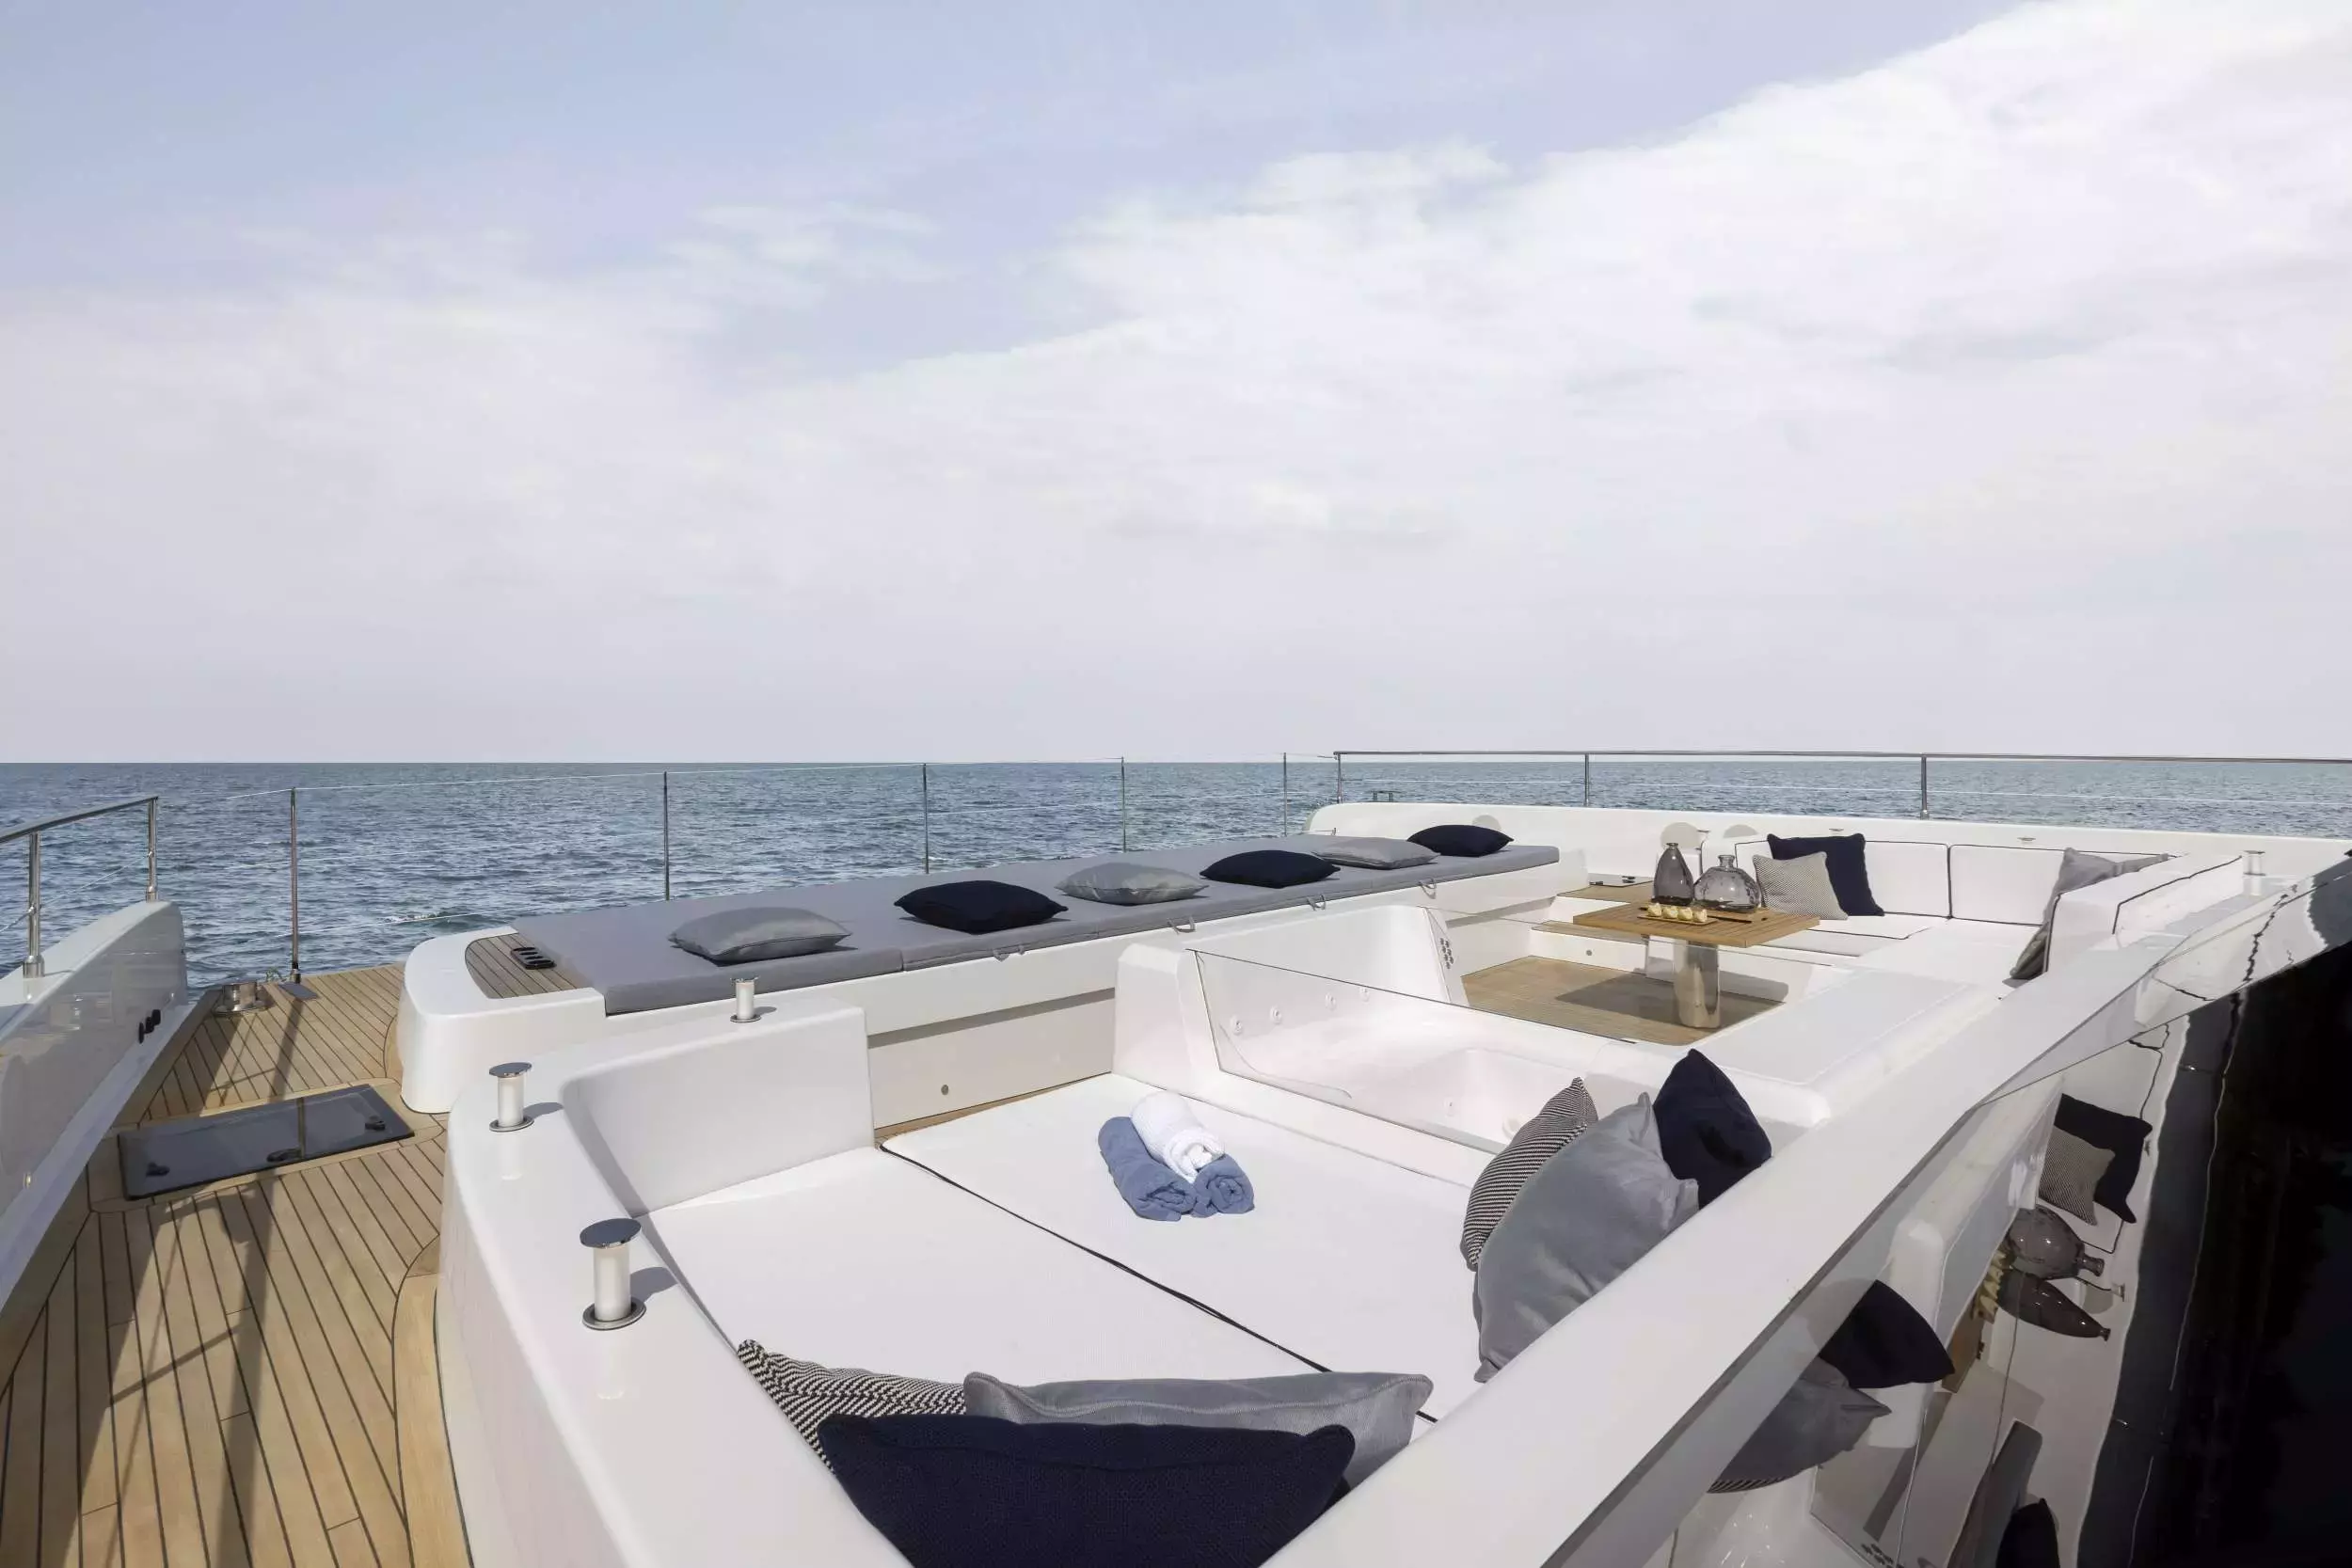 Pronto by Sunreef Yachts - Top rates for a Charter of a private Power Catamaran in Bahamas